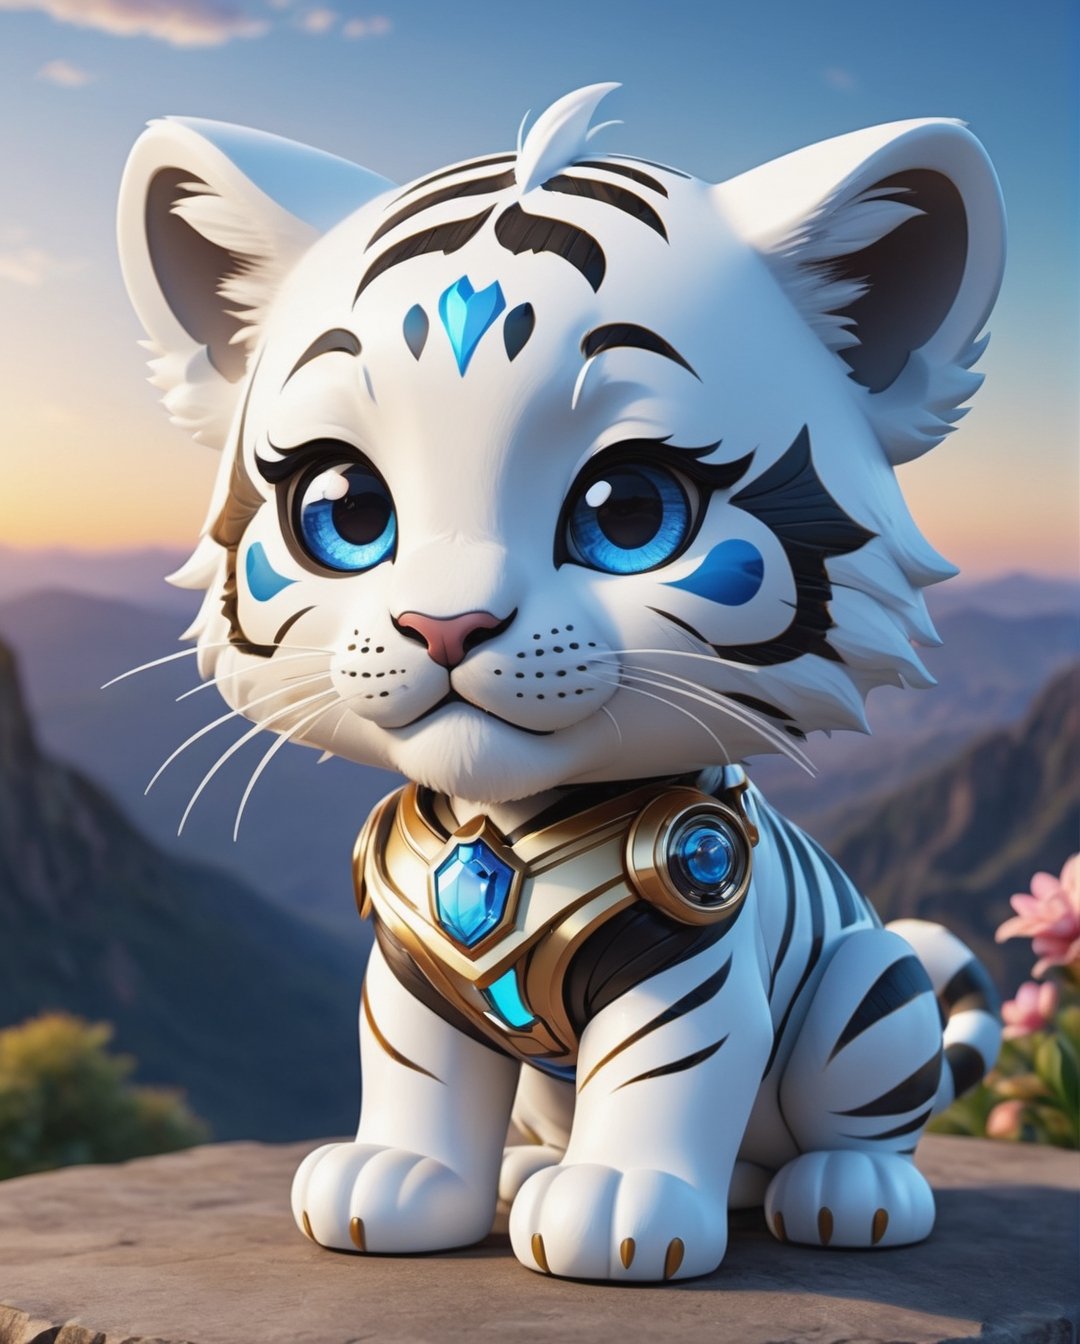 (masterpiece:1.2, highest quality), (realistic, photo_realistic:1.9)
1chibi_tiger, Cute white tiger, smug face, Chest written: "TA", (Designer look holding a pencil in one hand), white with blue, (detailed background), (gradients), colorful, detailed landscape, visual key, shiny skin. Modern place, Action camera. Portrait film. Standard lens. Golden hour lighting.
sharp focus, 8k, UHD, high quality, frowning, intricate detailed, highly detailed, hyper-realistic,interior,robot white with blue,chibi emote style,Monster,